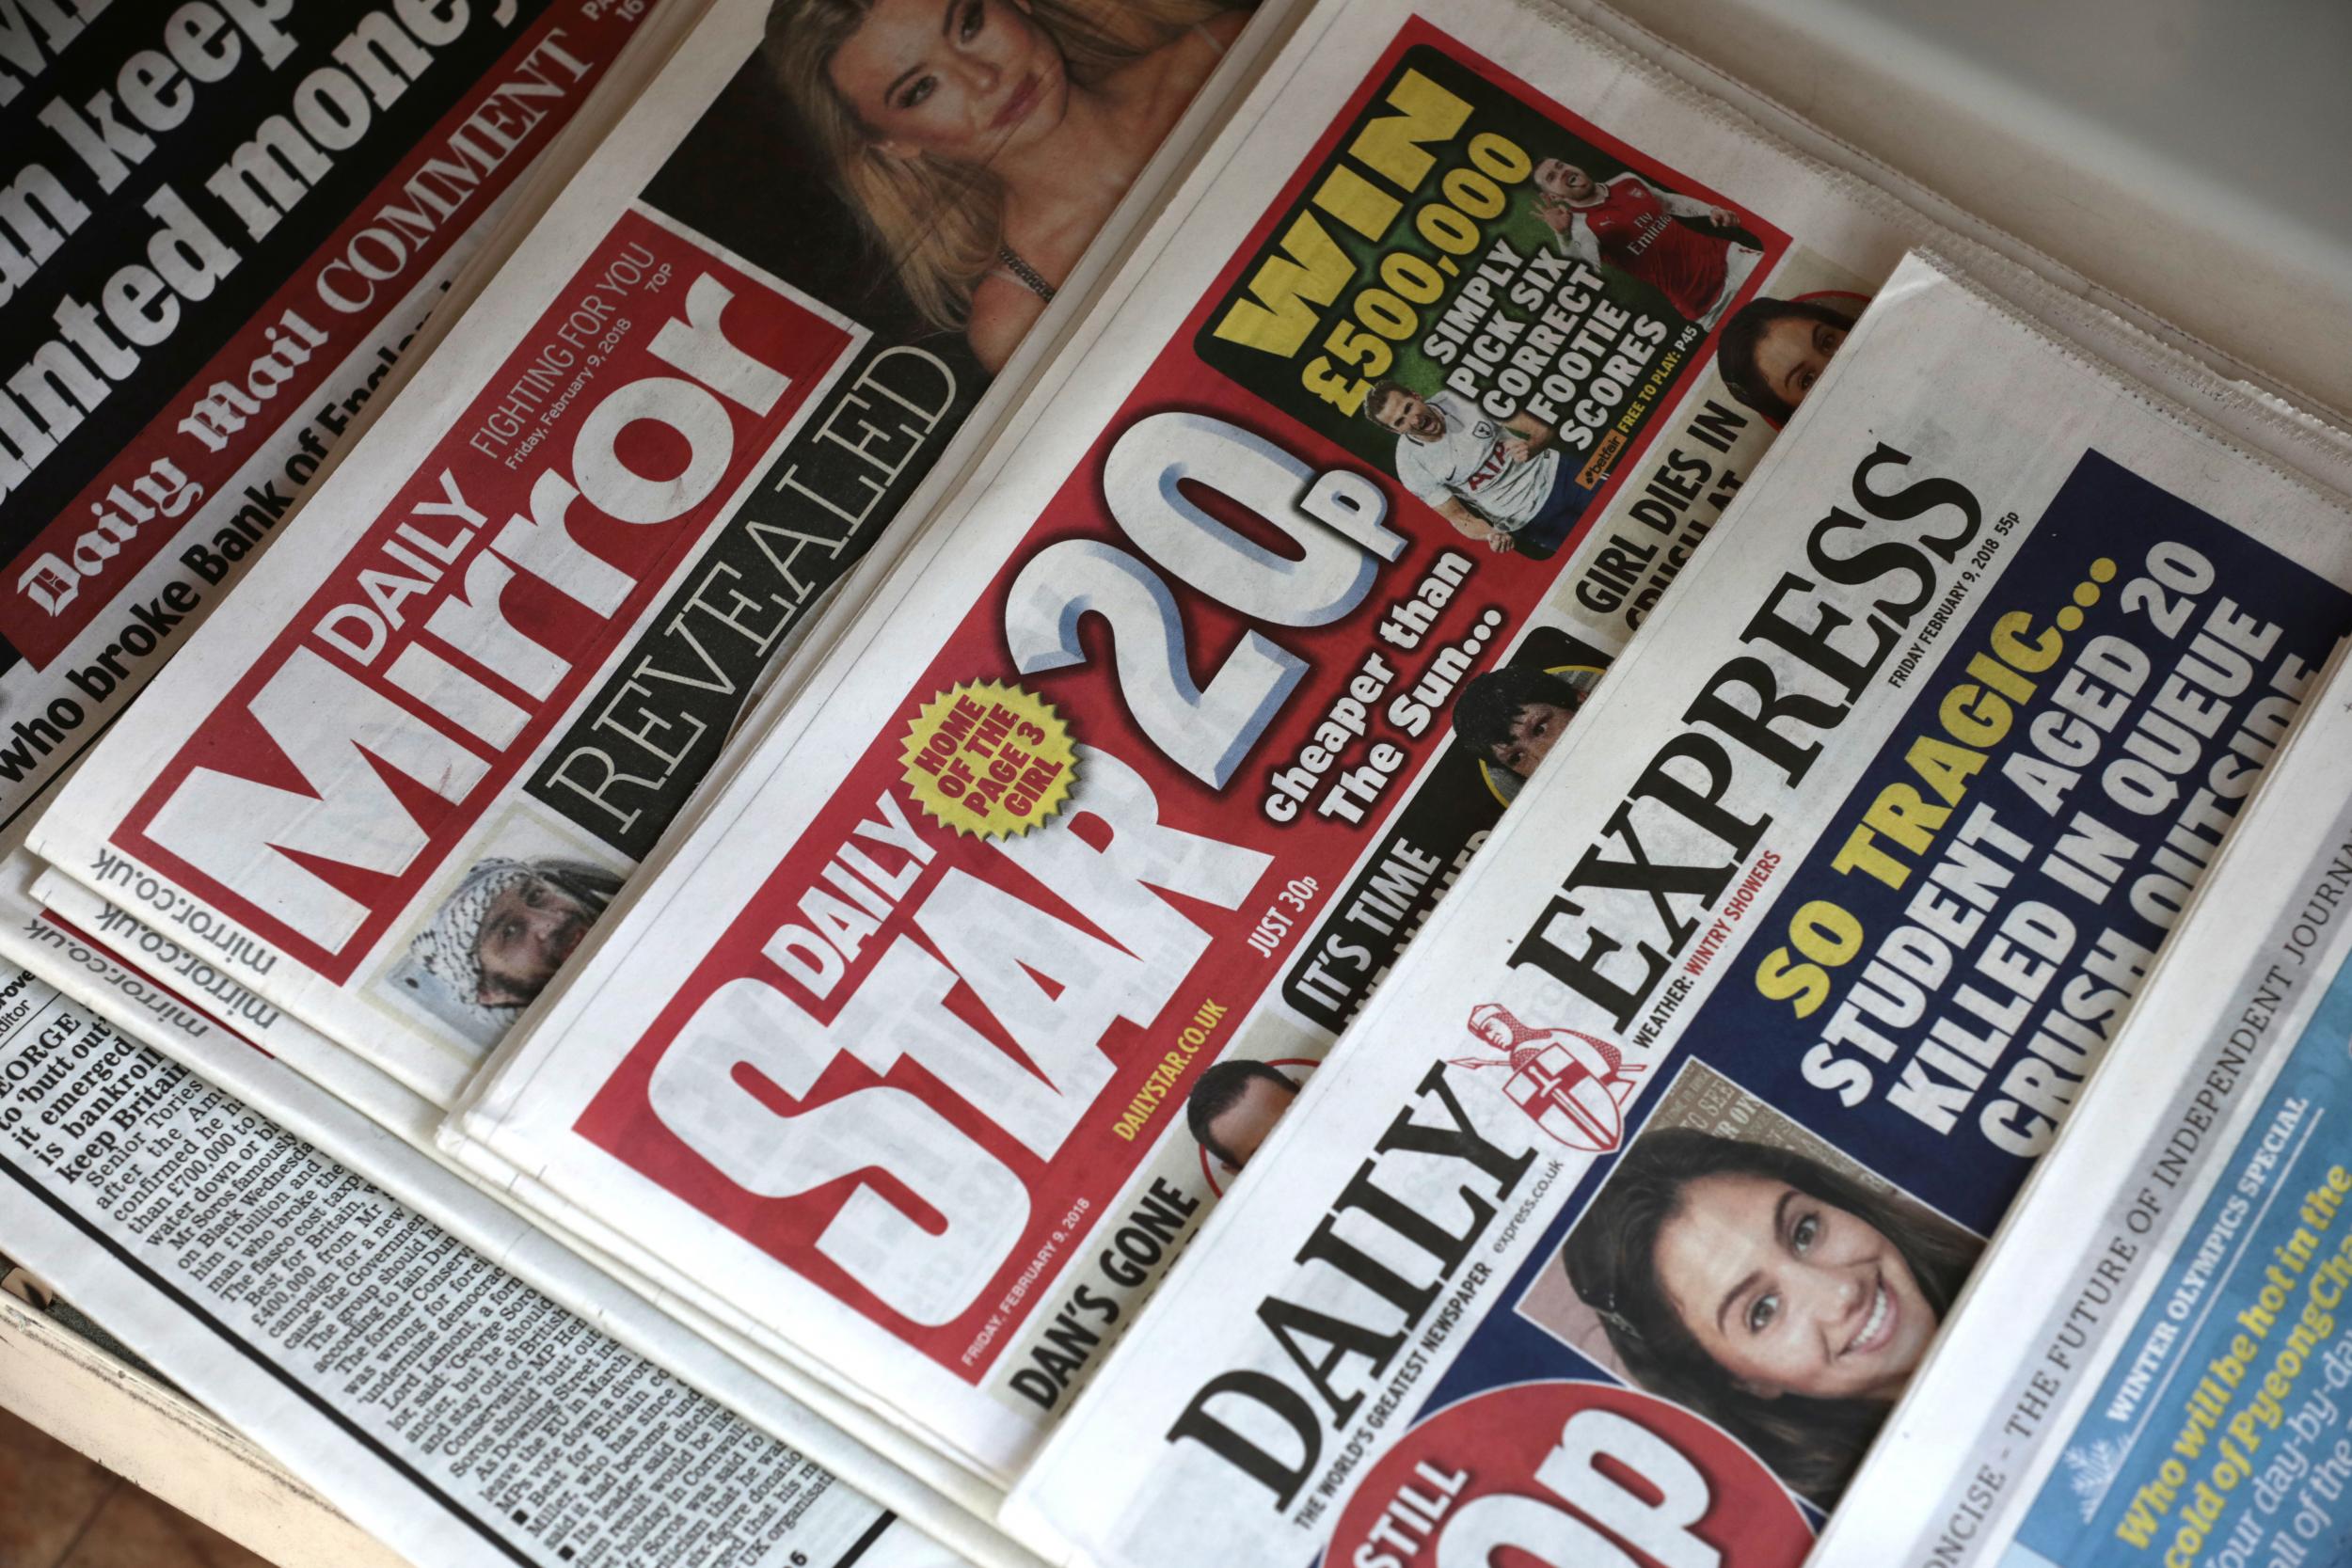 Reach, formerly known as Trinity Mirror, recently acquired the Daily Star and Express